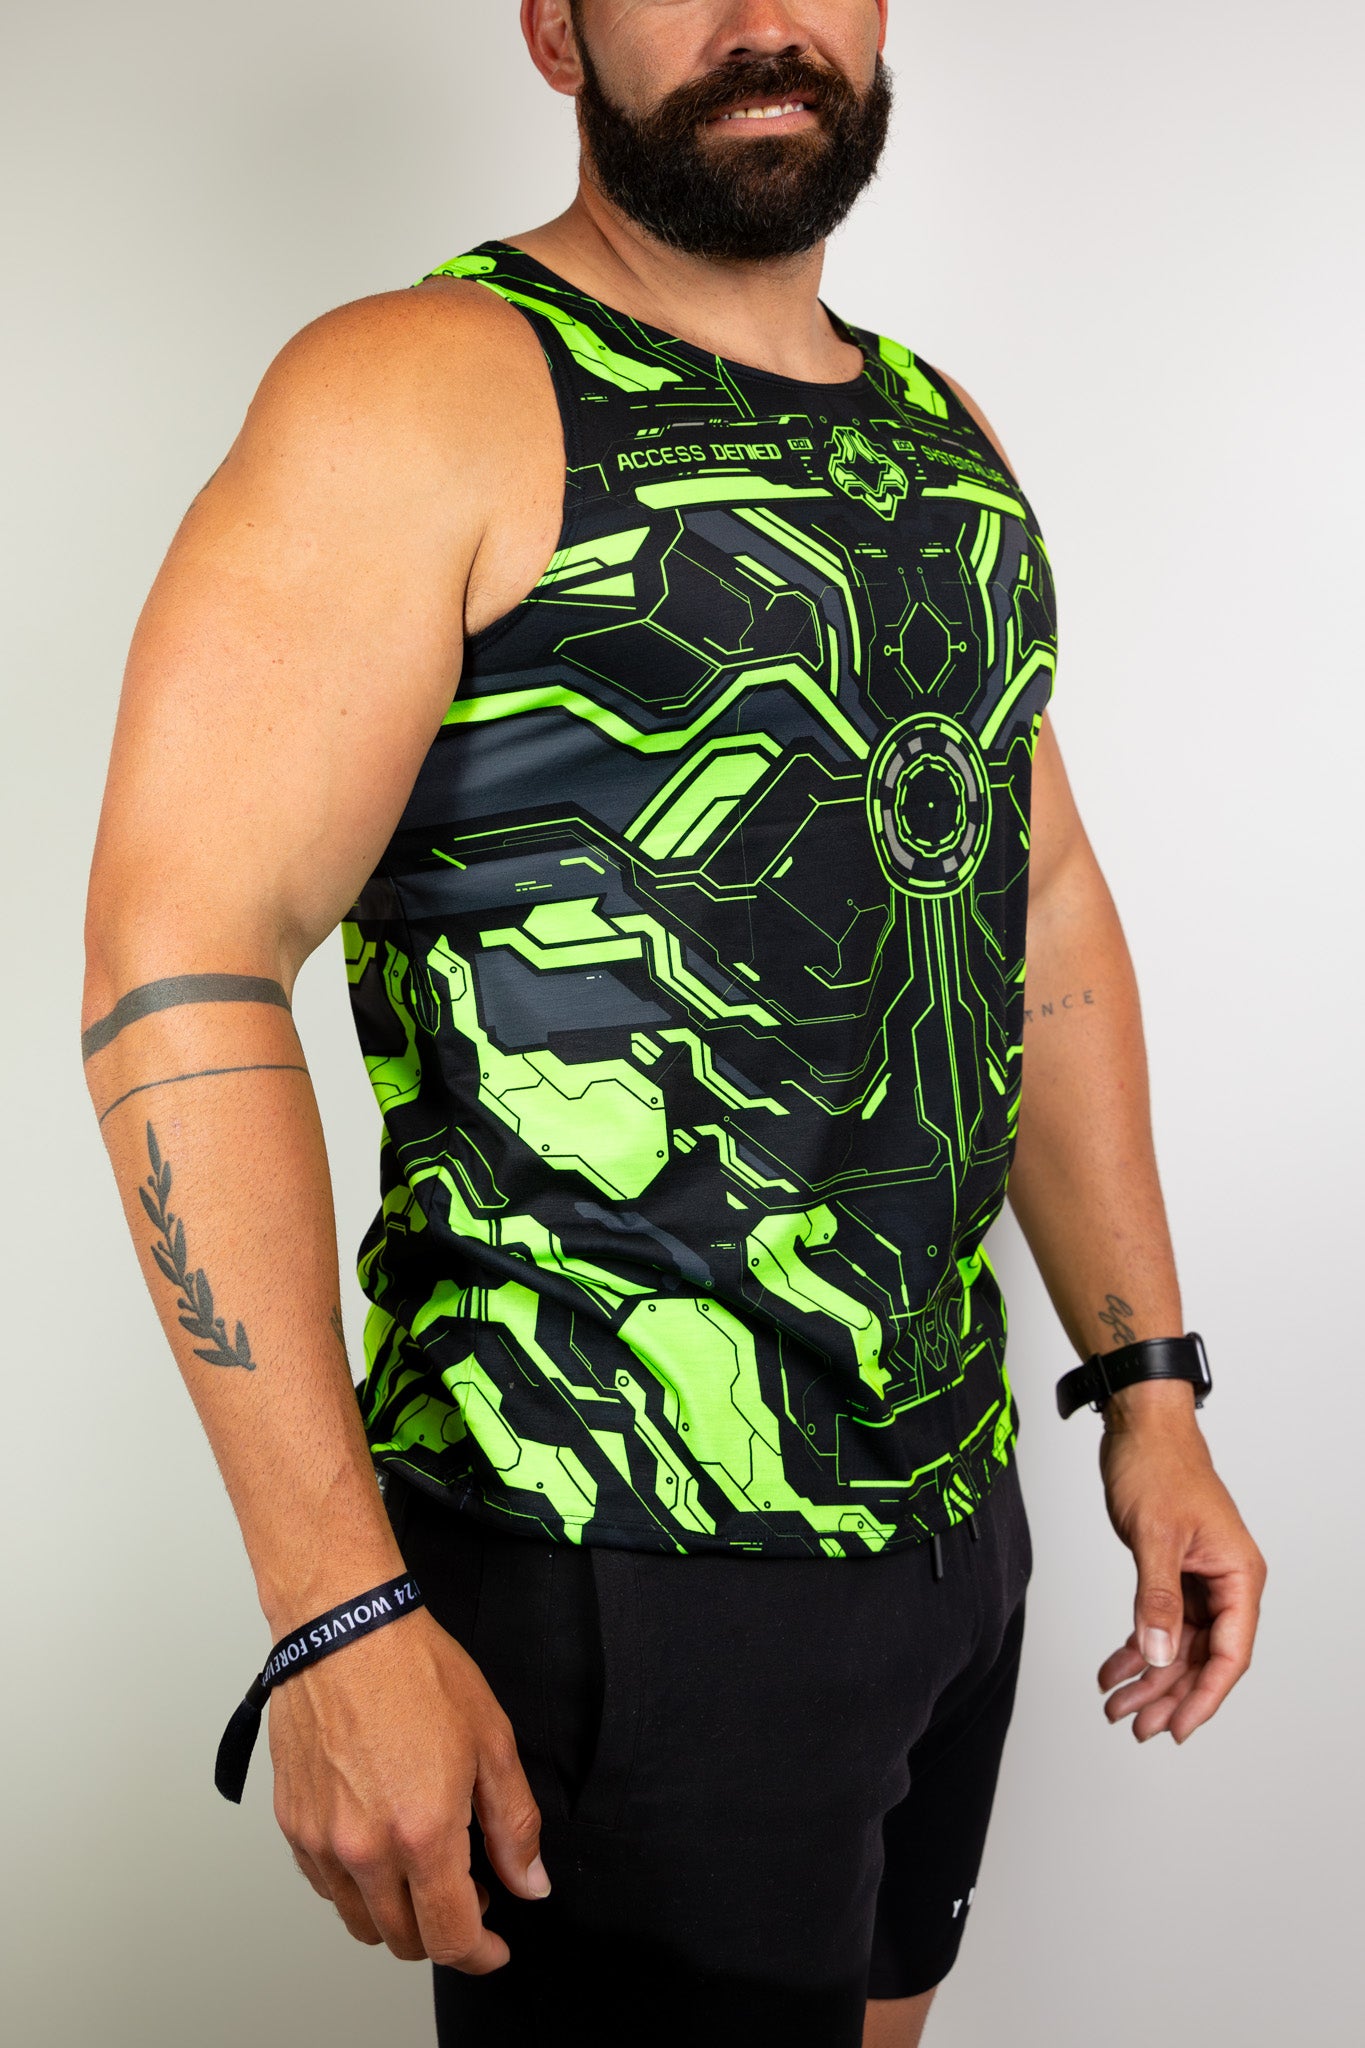  Model wearing a neon green and black tech-themed tank top, ideal for raves. Freedom Rave Wear provides unique festival fashion. 